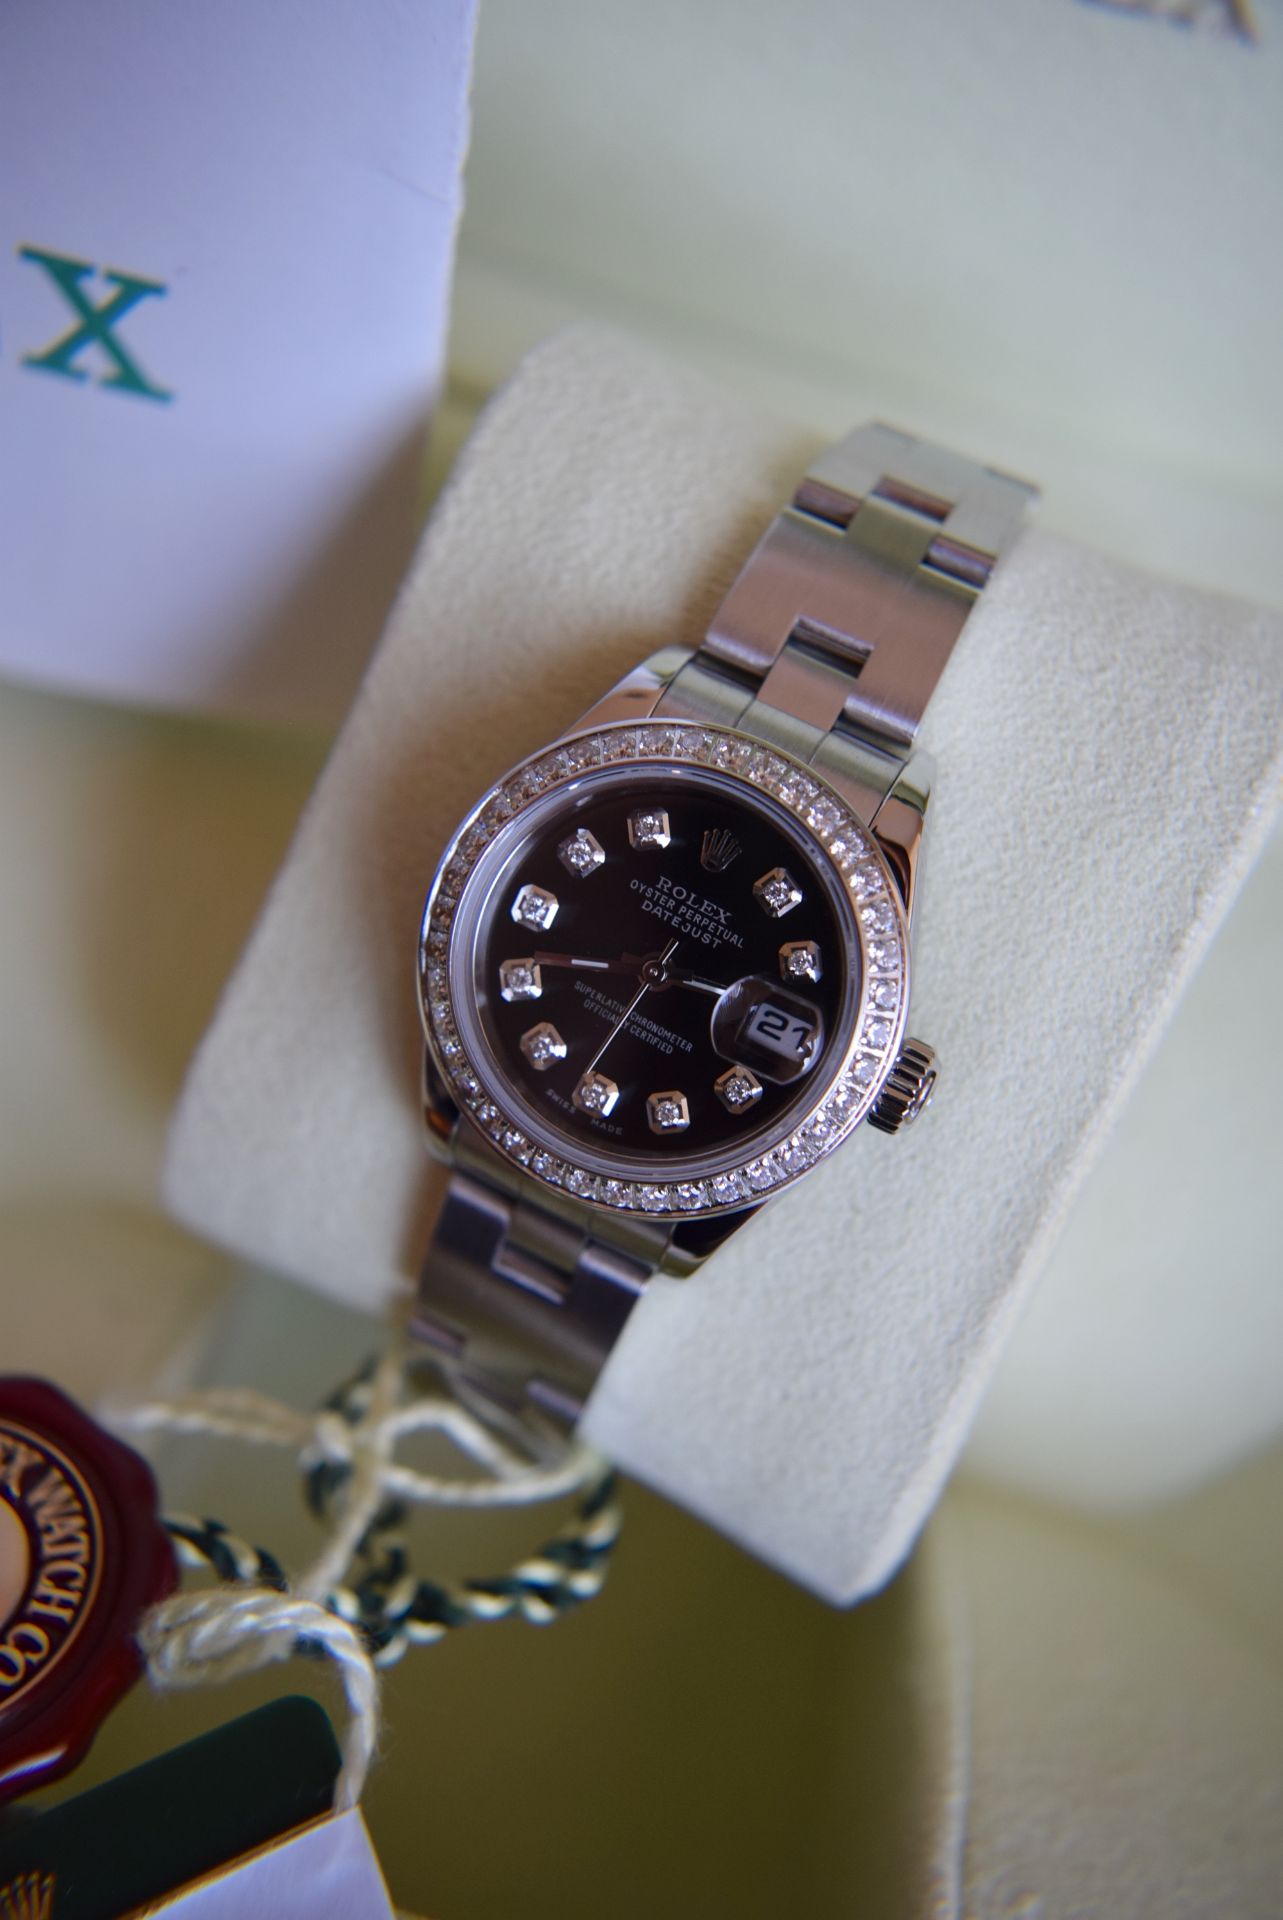 (Full Set) *Gorgeous* 2002 Rolex Oyster Datejust Stainless Steel - Glossy Black Diamond-set Dial - Image 2 of 25